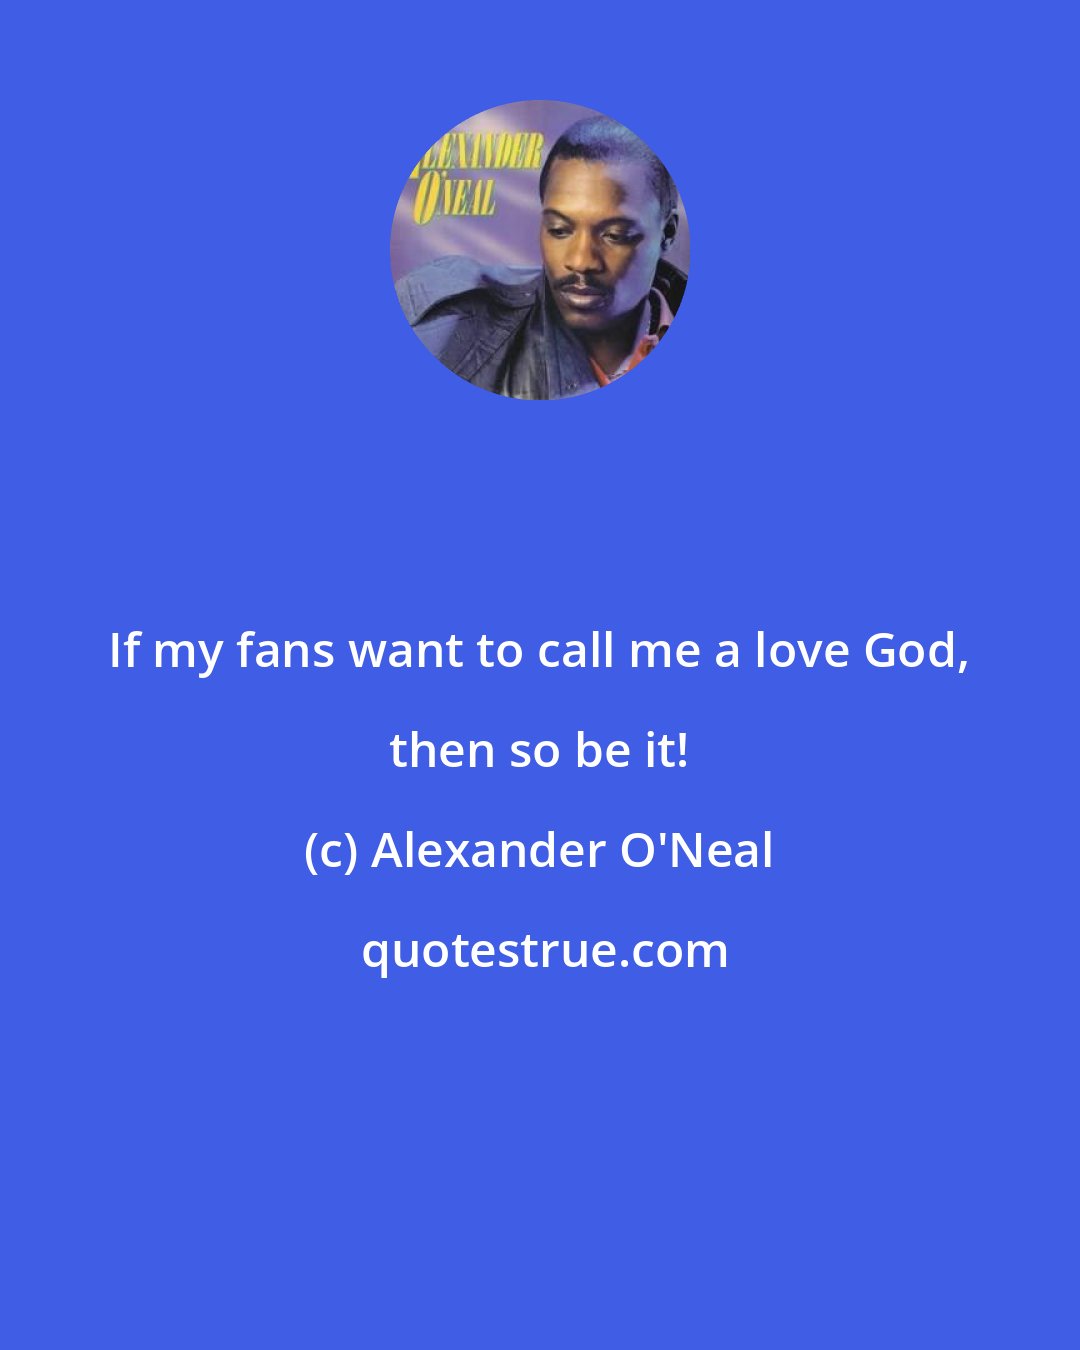 Alexander O'Neal: If my fans want to call me a love God, then so be it!